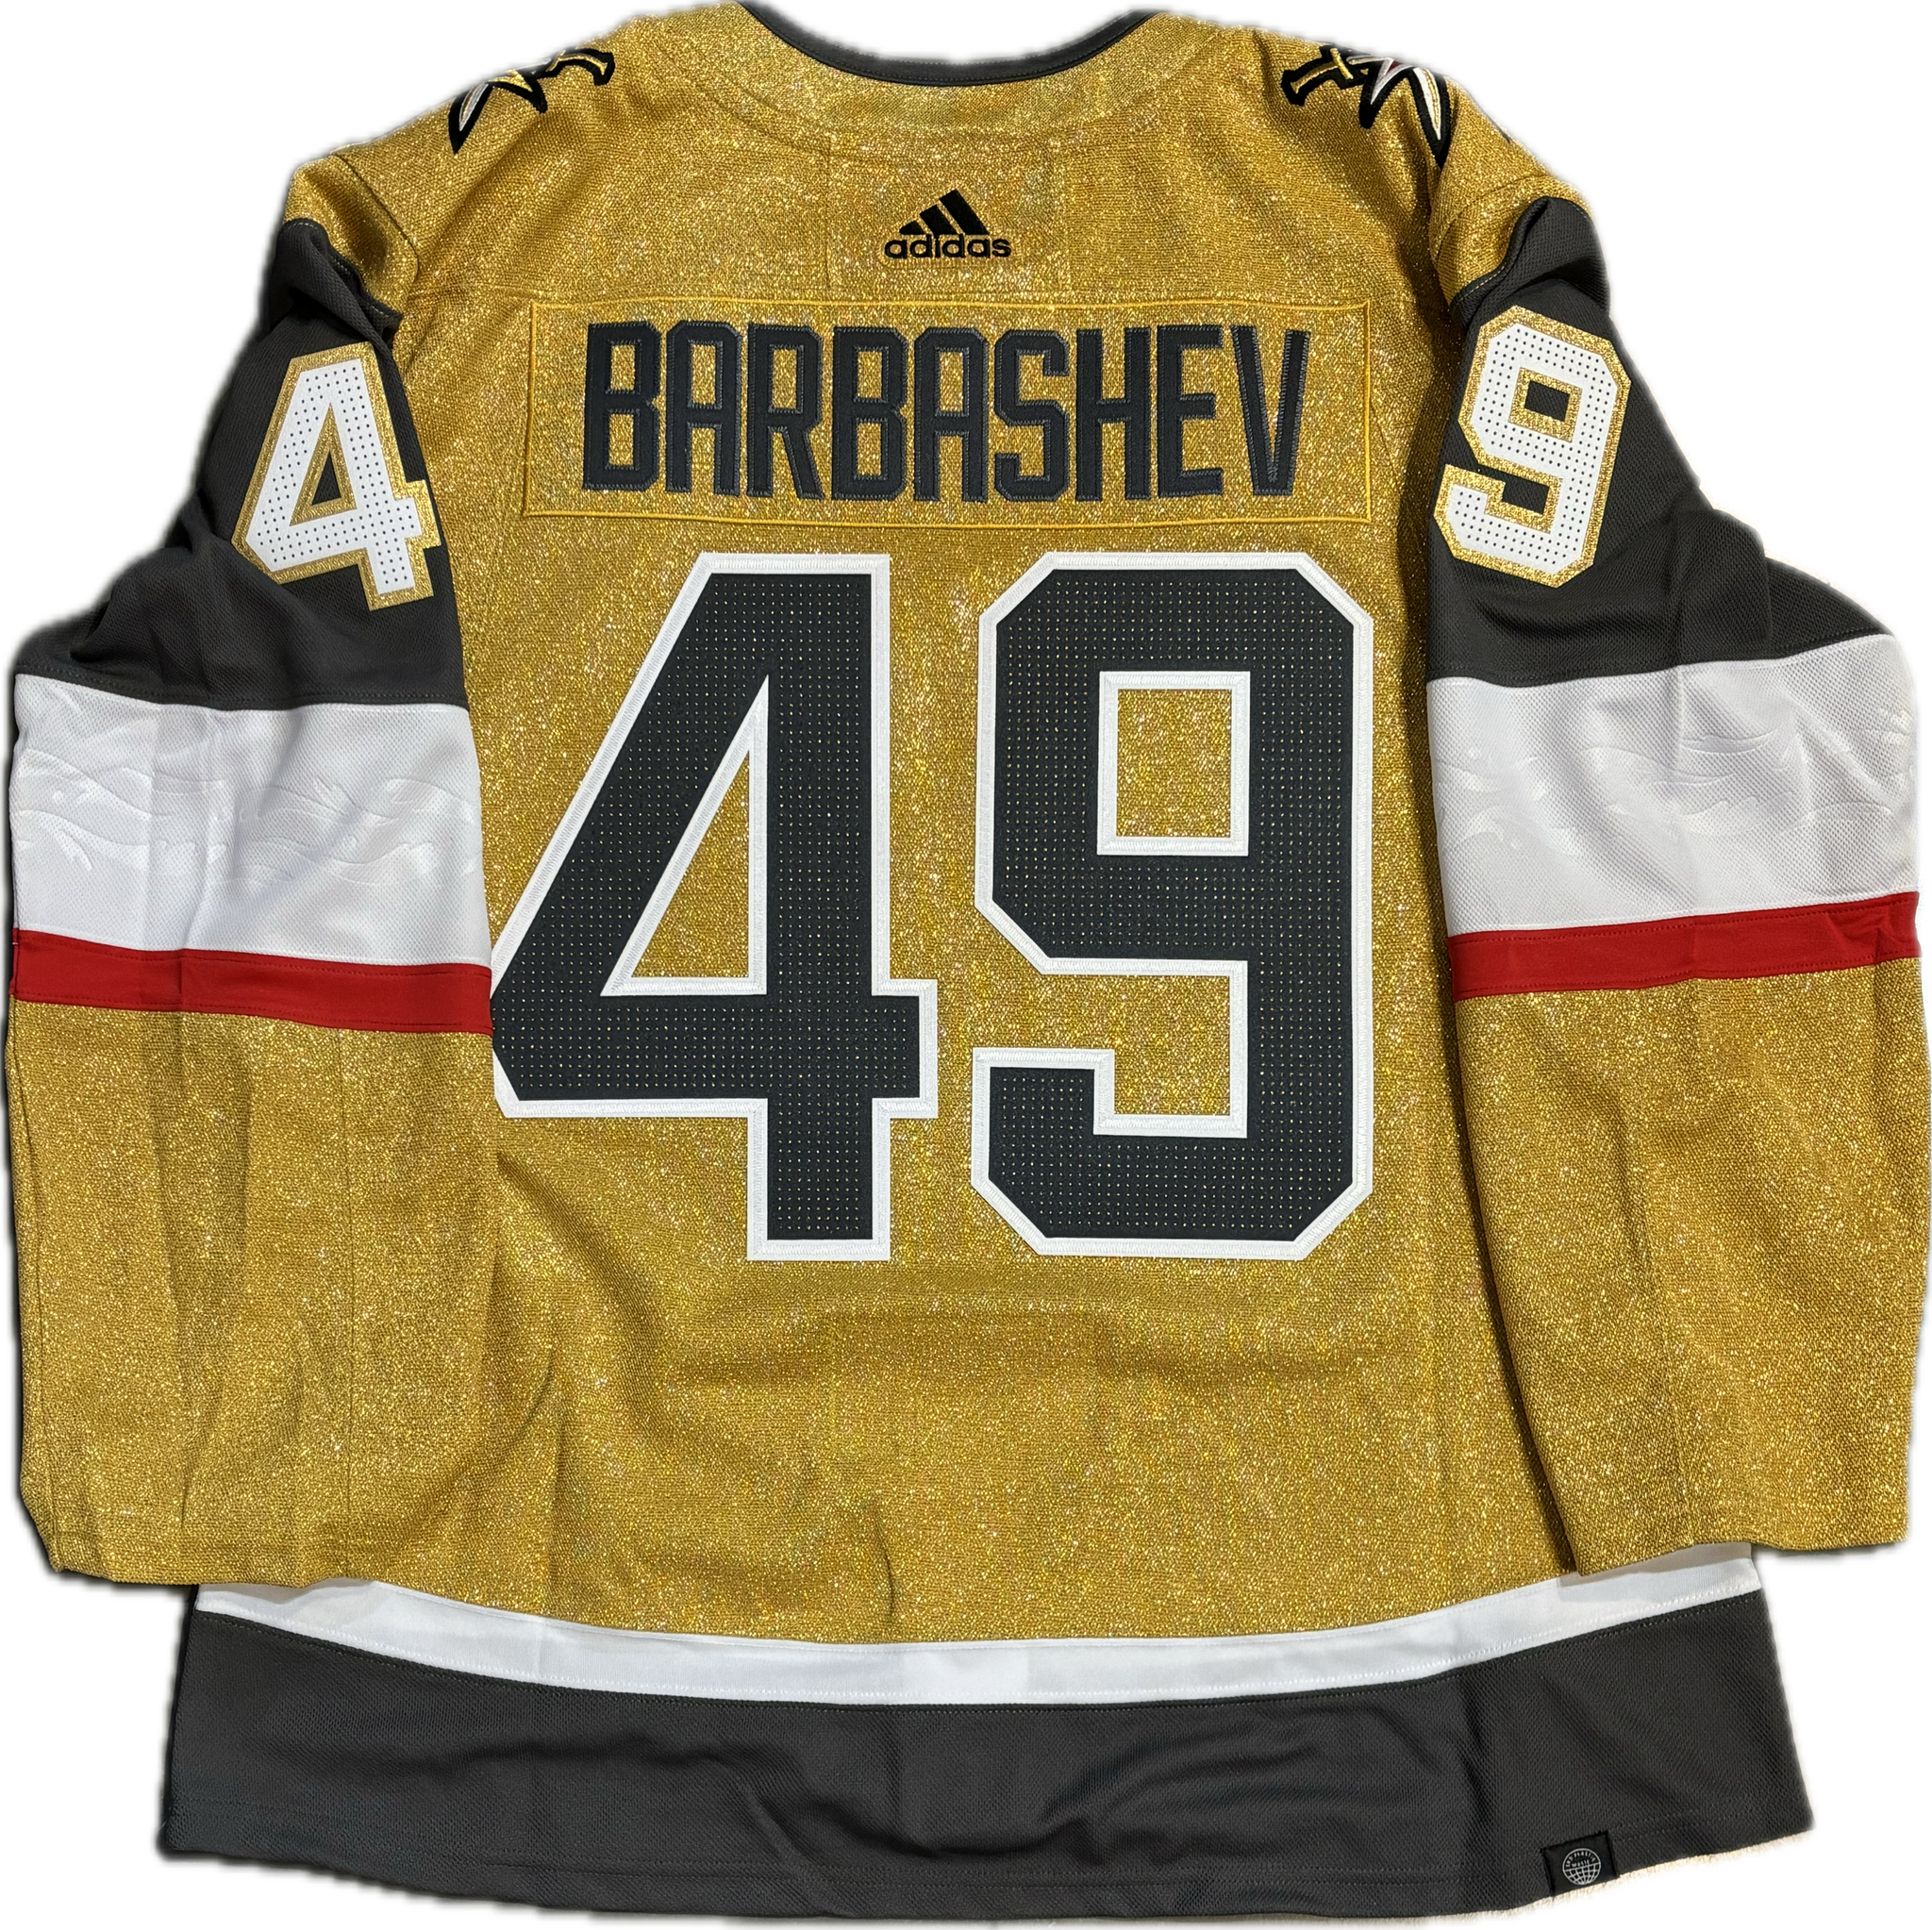 Vegas Golden Knights Ivan Barbashev #49 Men's Adidas Authentic Home Jersey - Gold ***